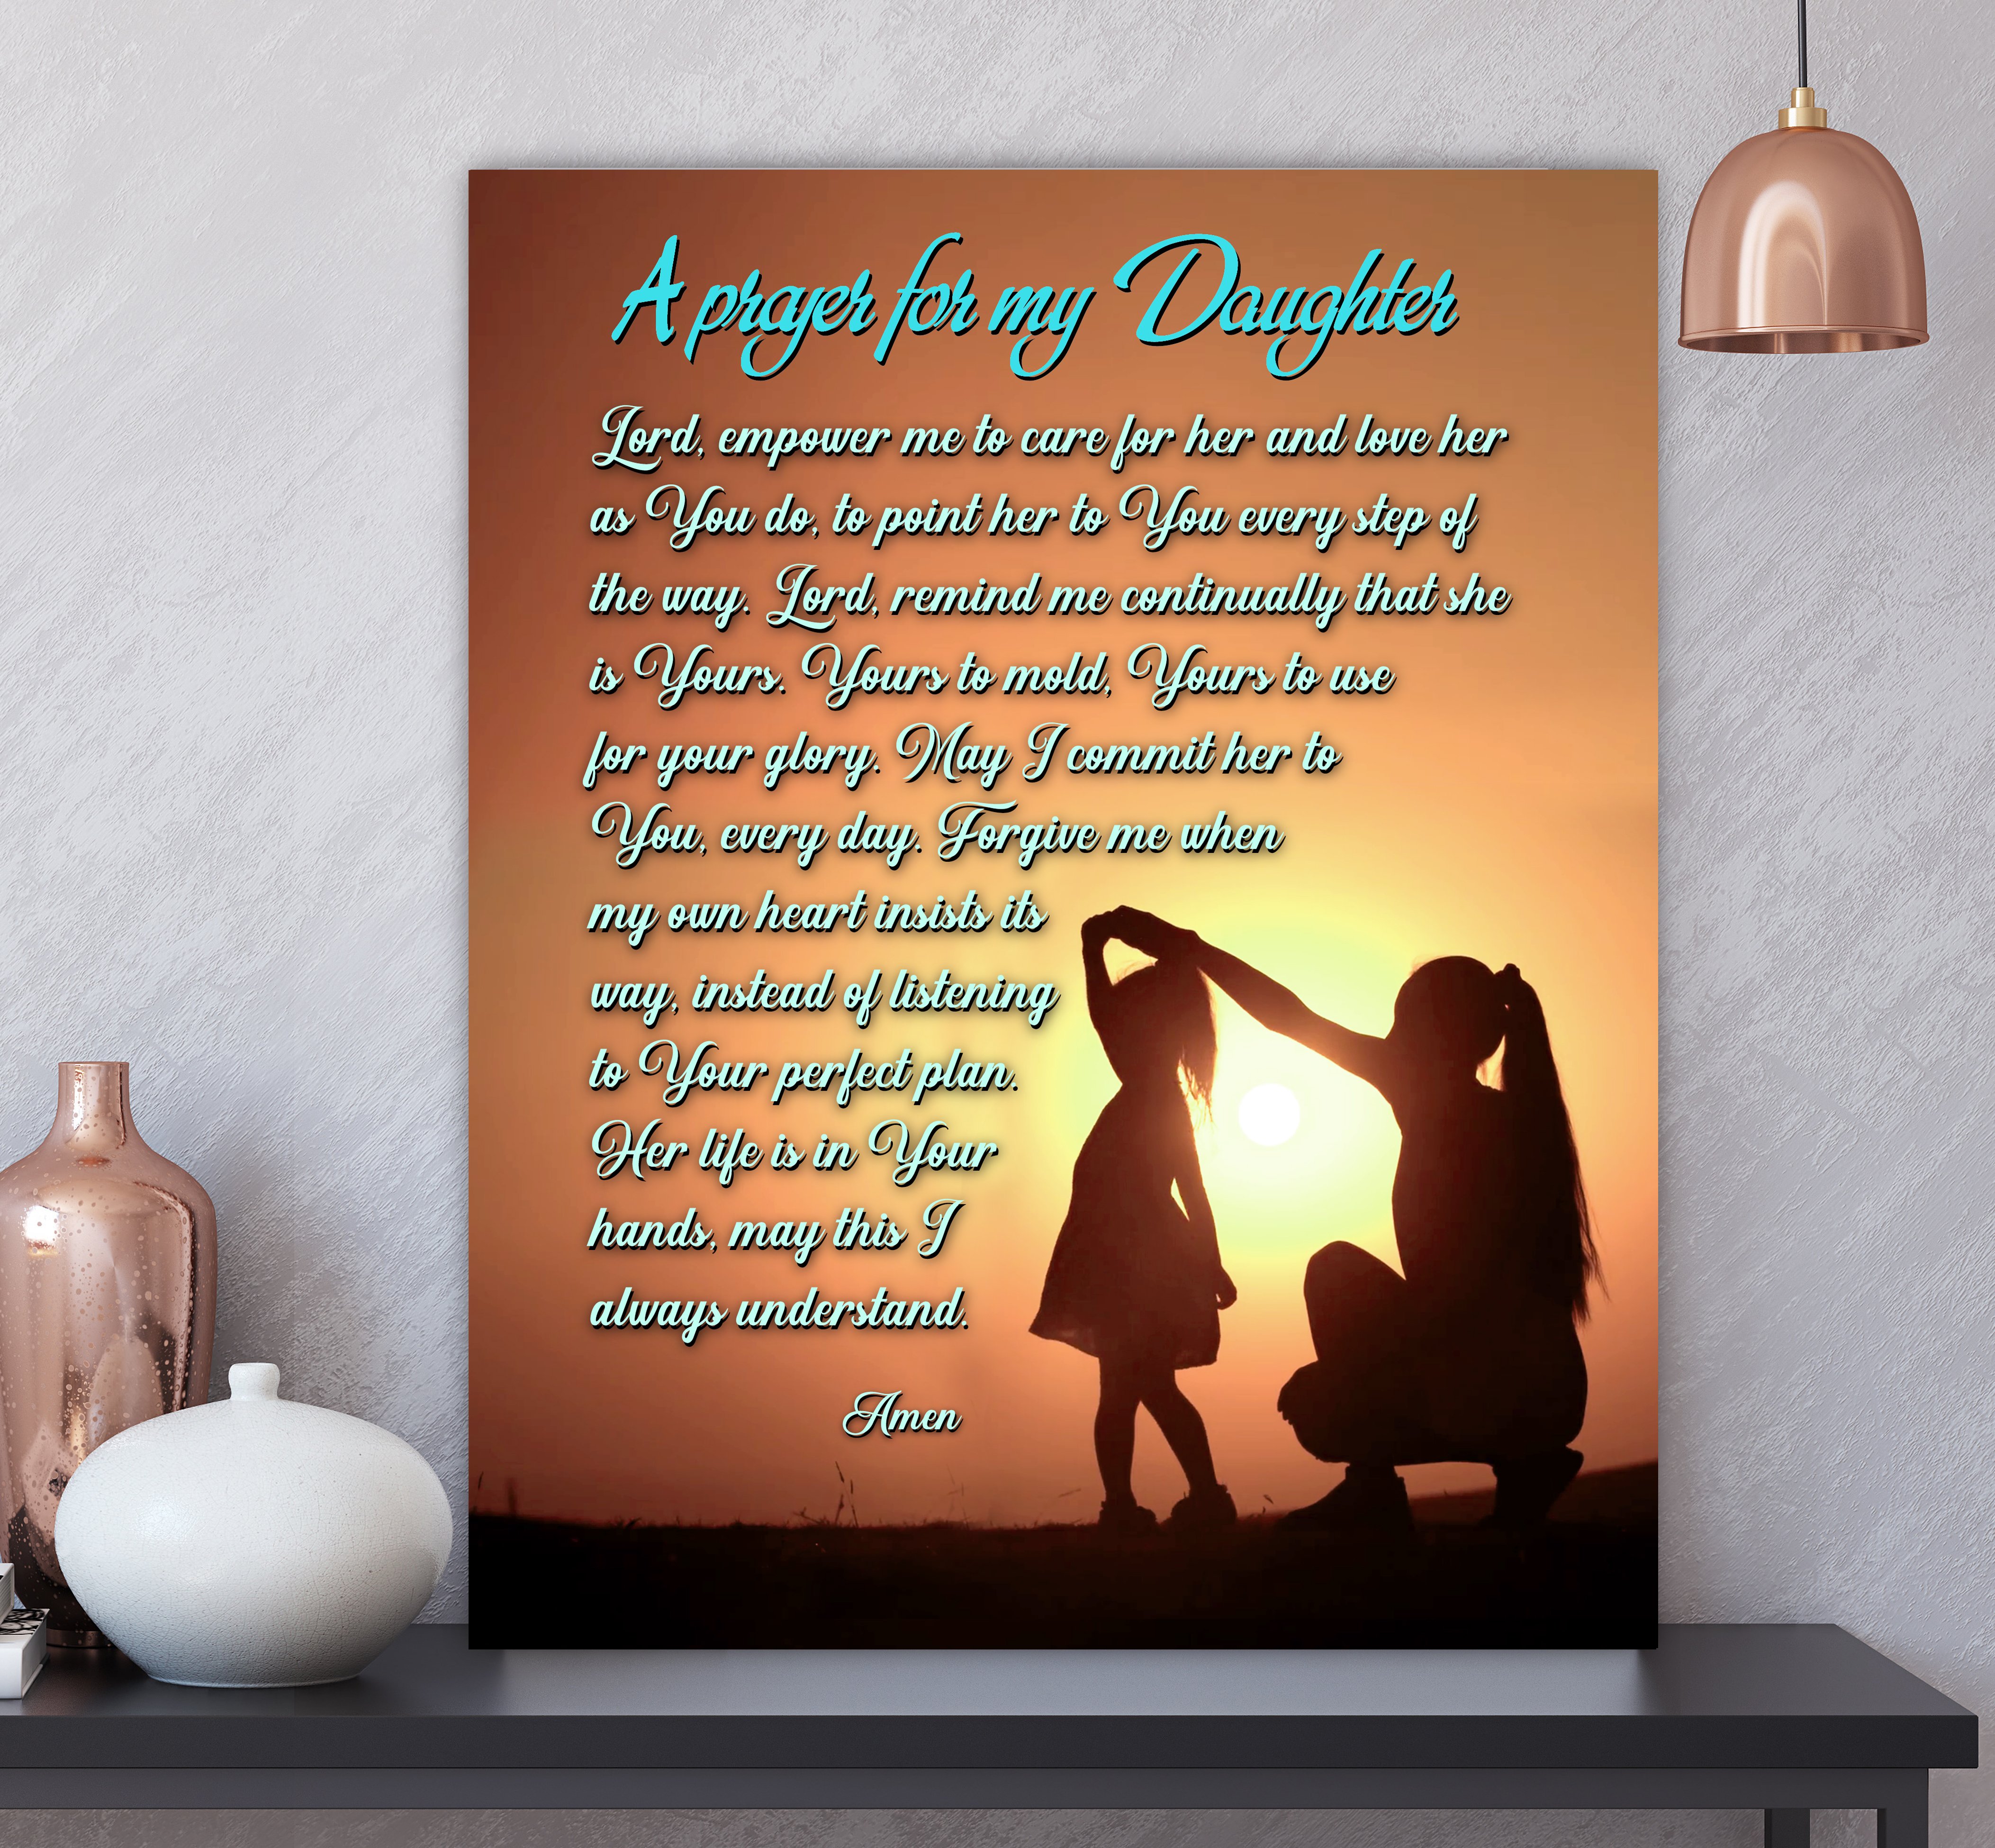 Custom personalized photo to canvas prints wall art gifts idea, pictures on canvas Christmas, birthday presents for daughter & son - A Prayer For My Daughter